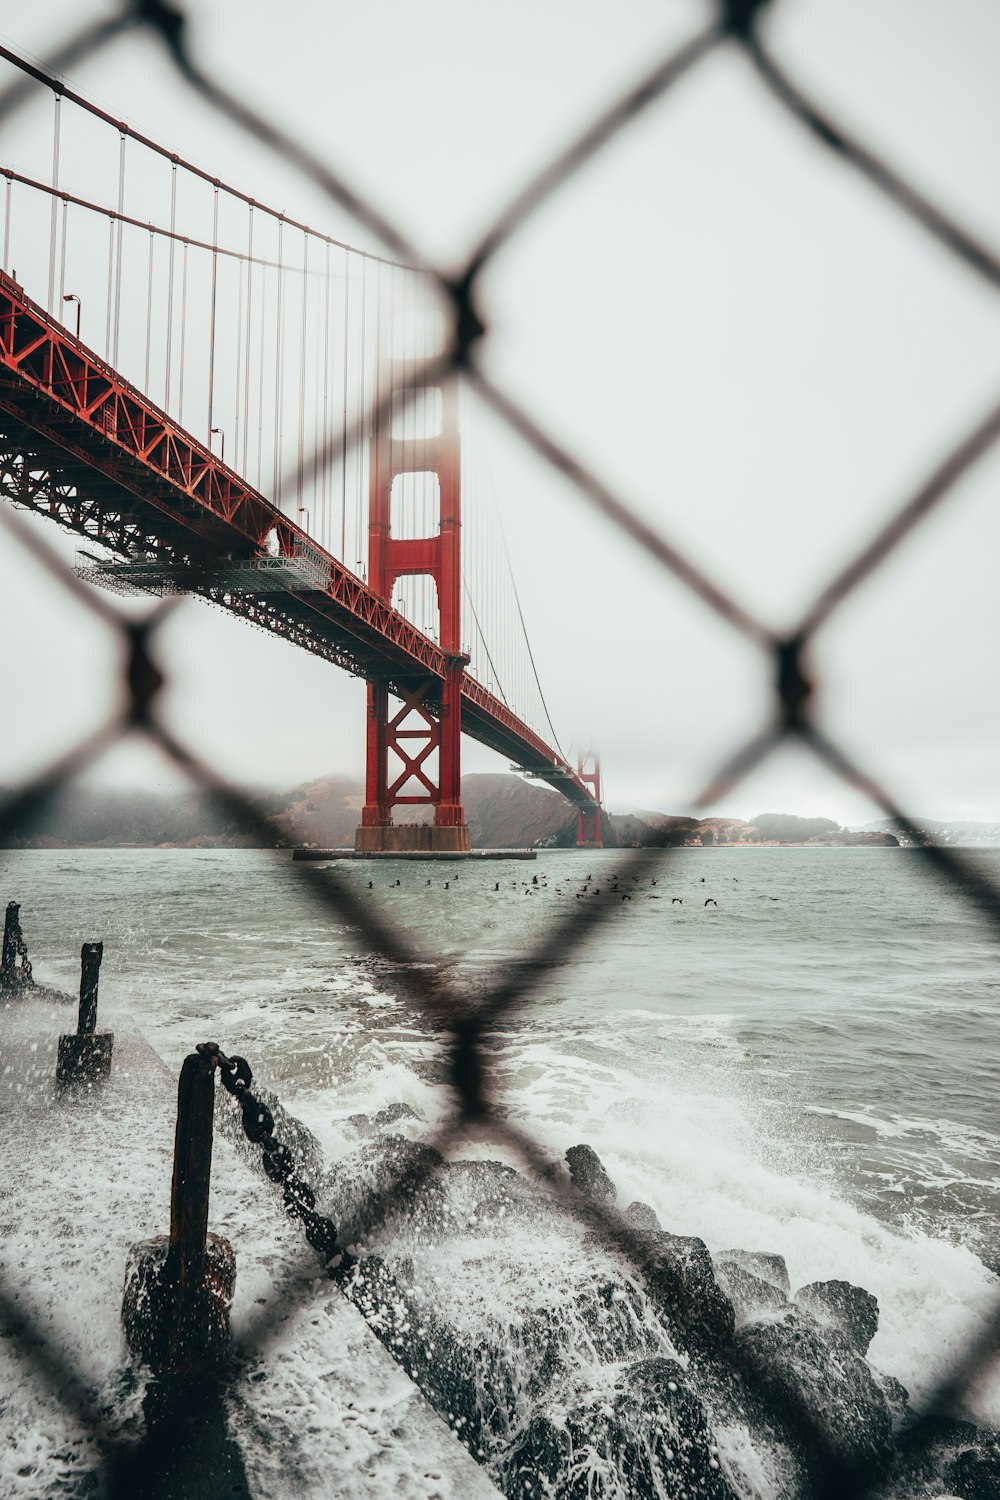 a view of the golden gate bridge through a chain link fence